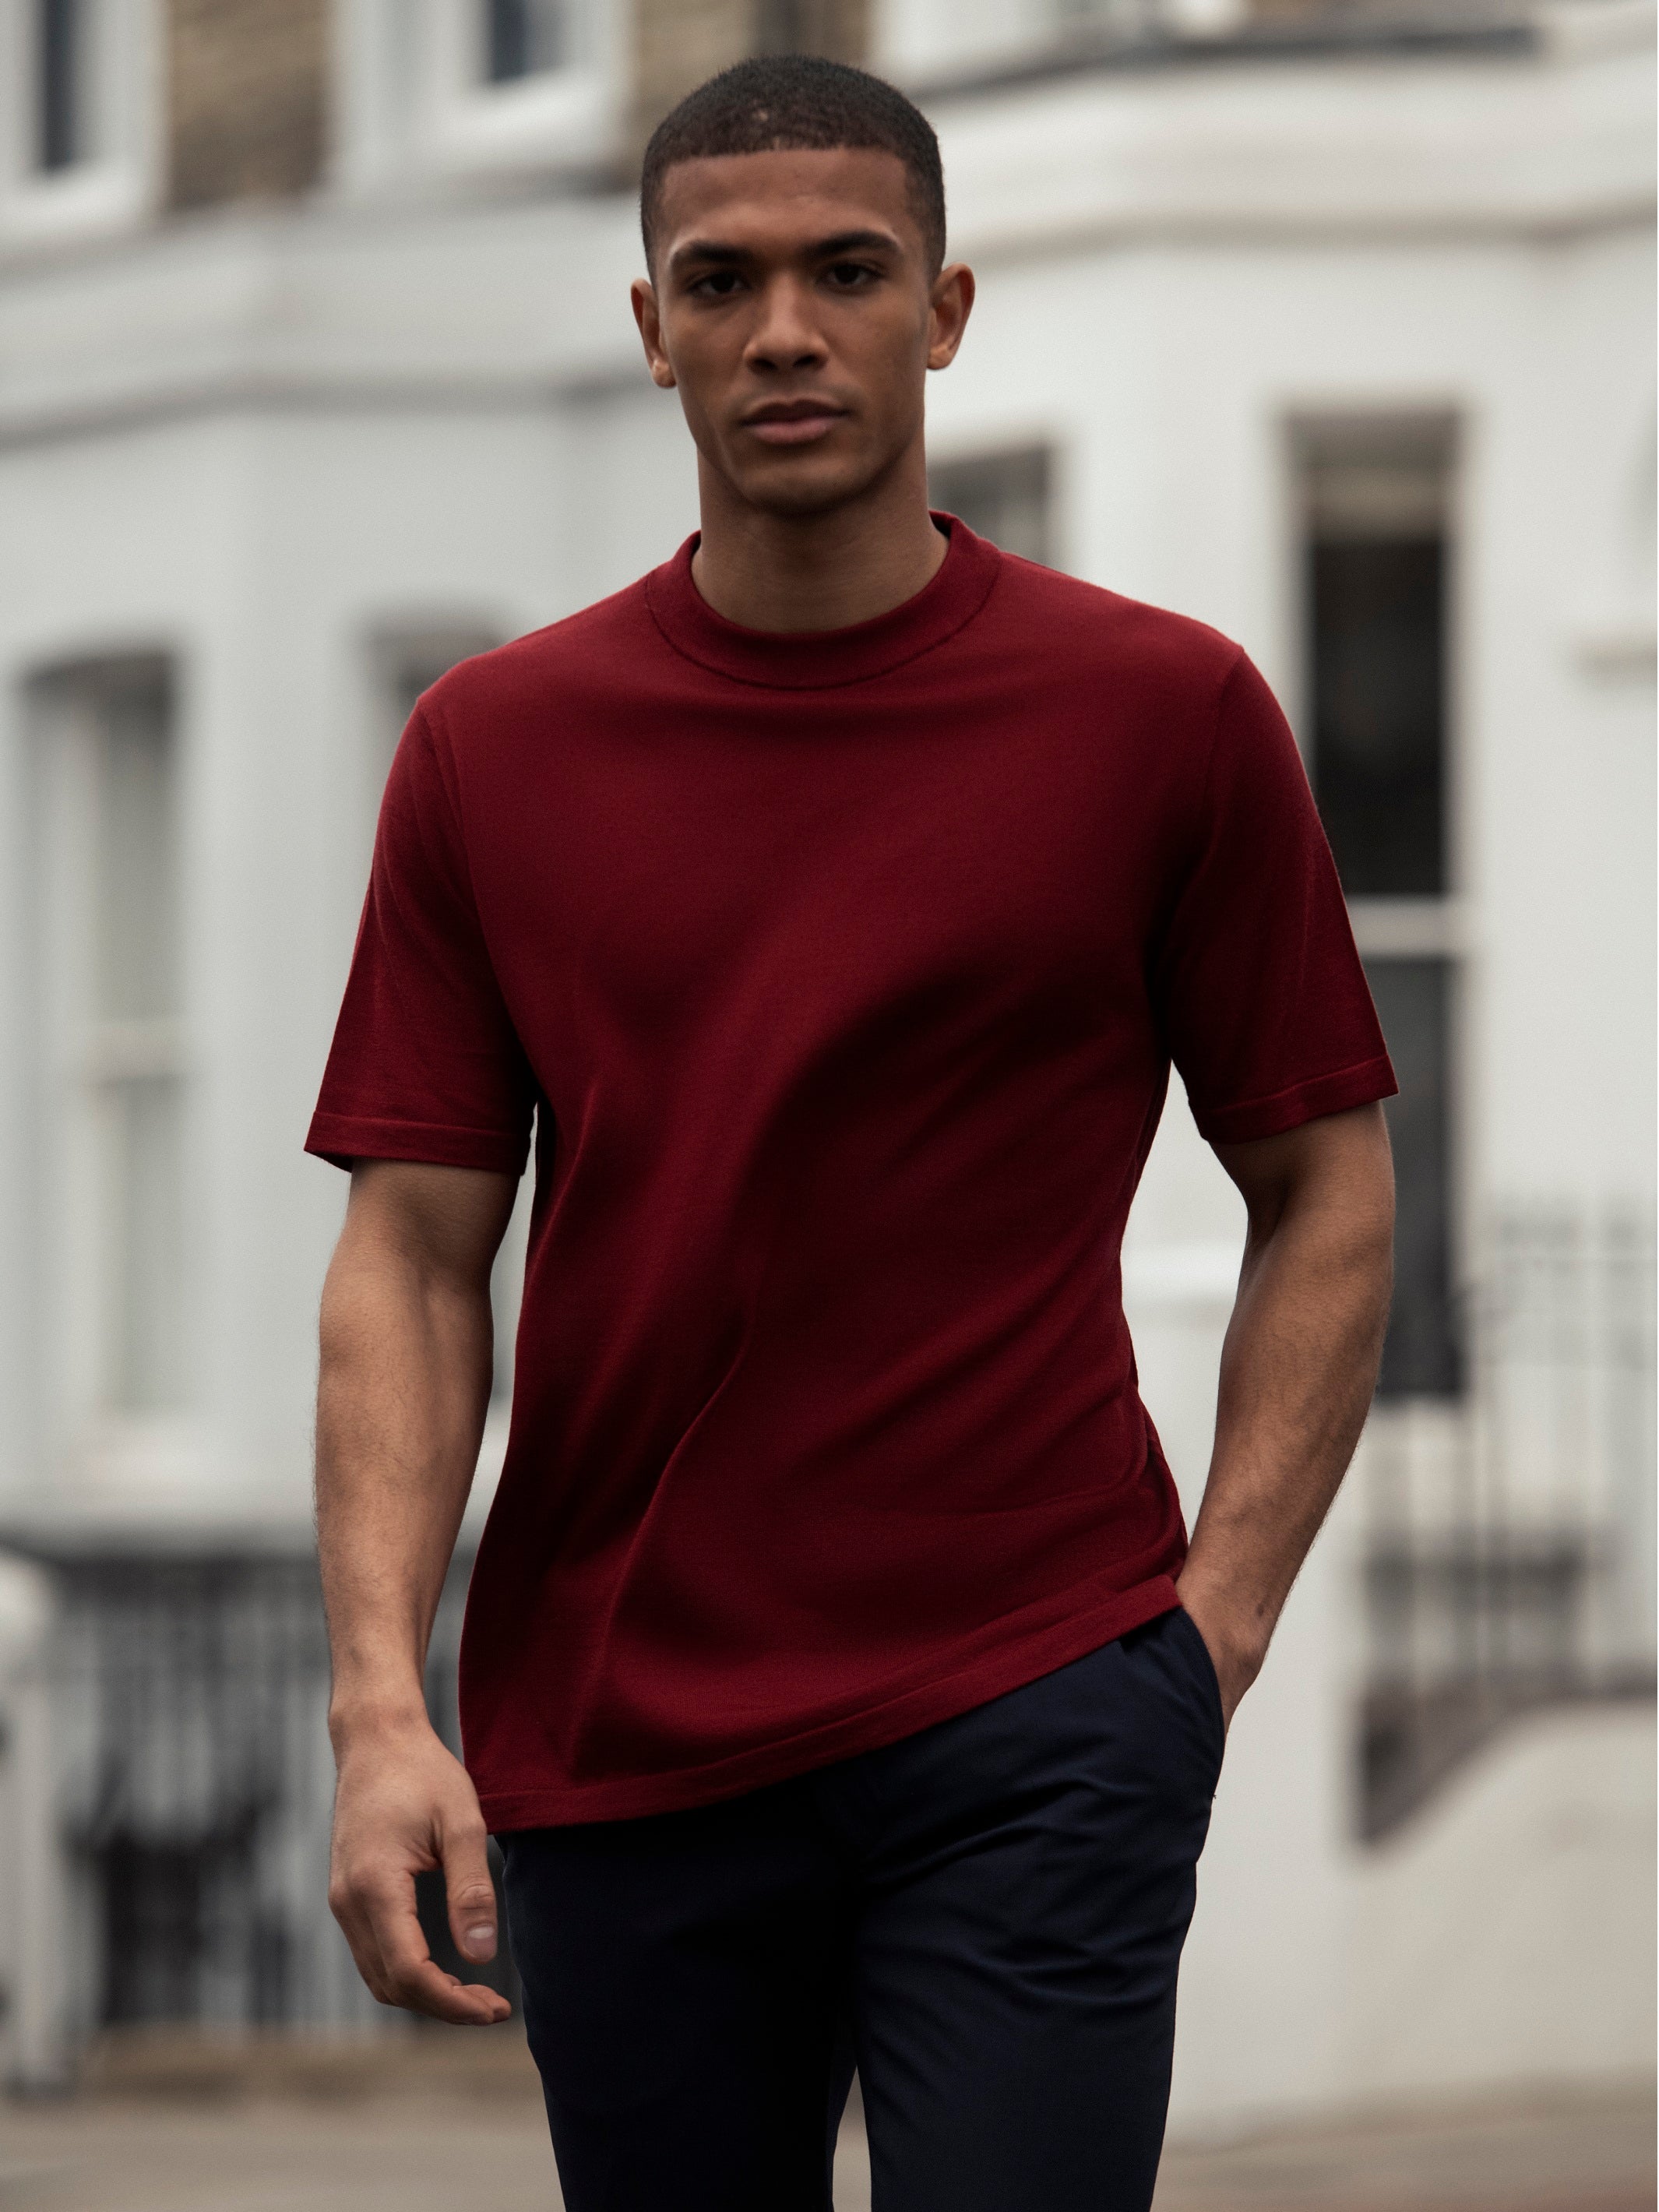 Bordeaux T-shirt made of natural silk and merino wool